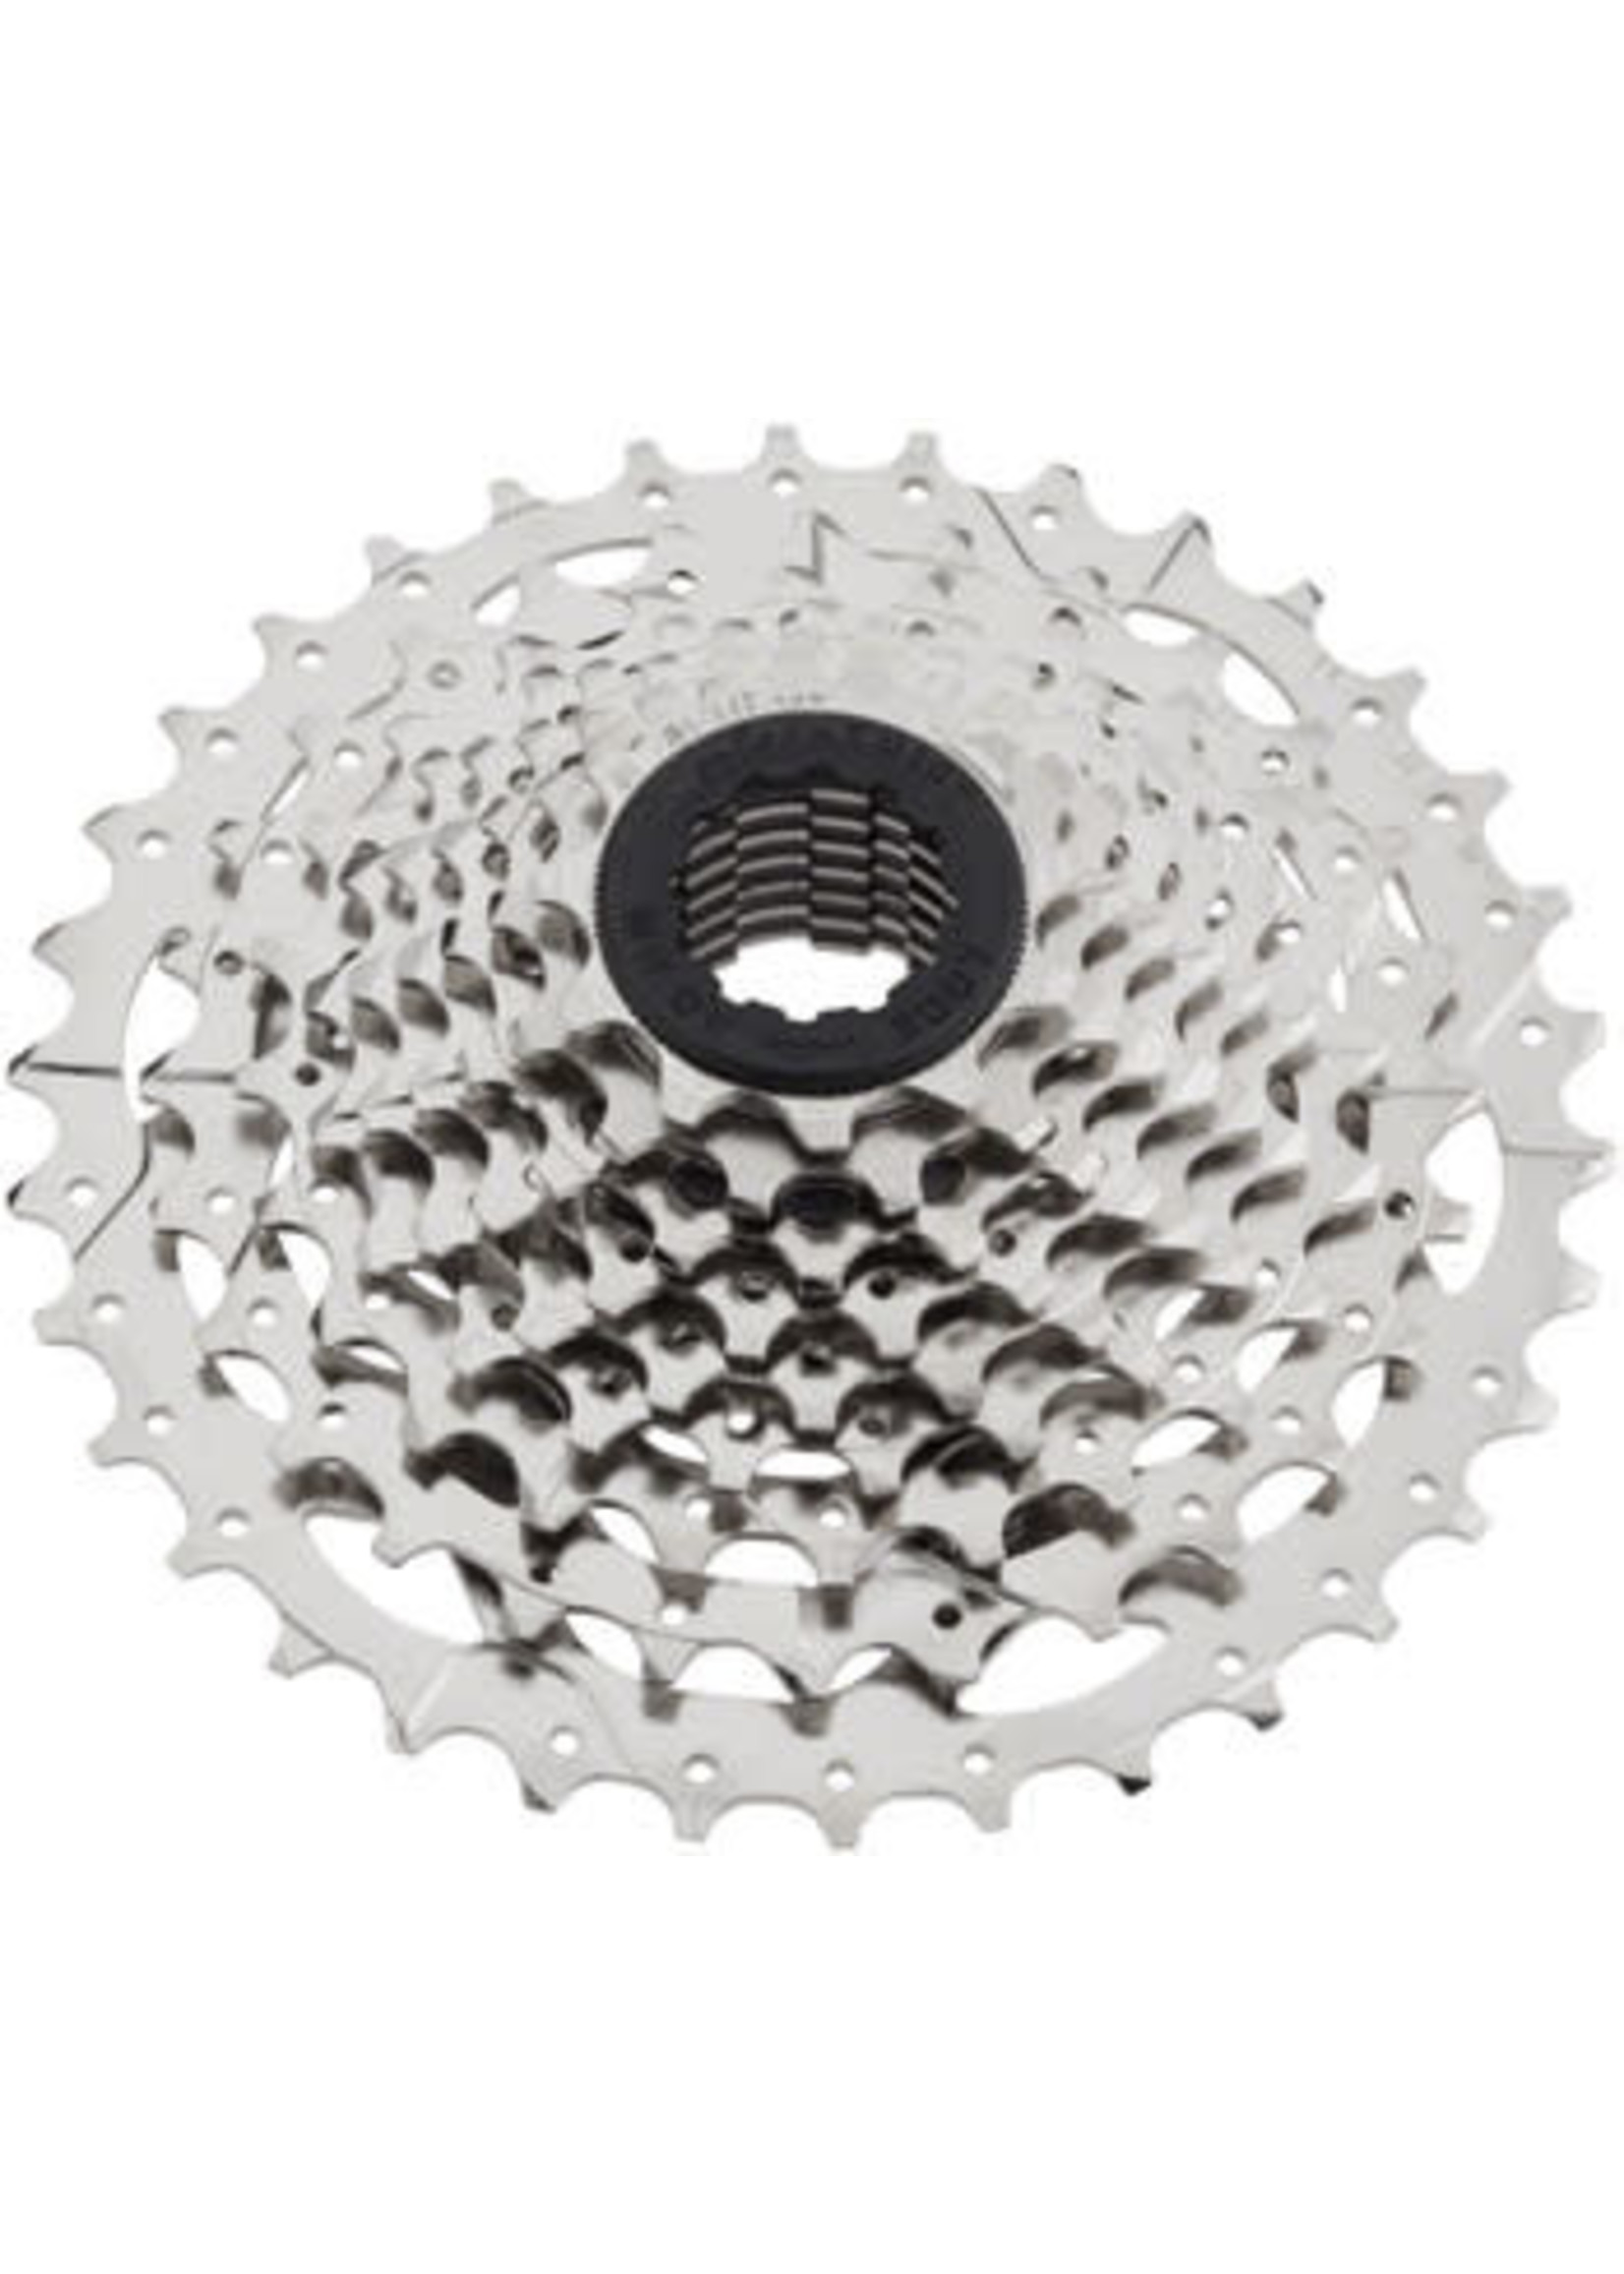 MicroShift microSHIFT H09 Cassette - 9 Speed 11-28t Silver Nickel Plated